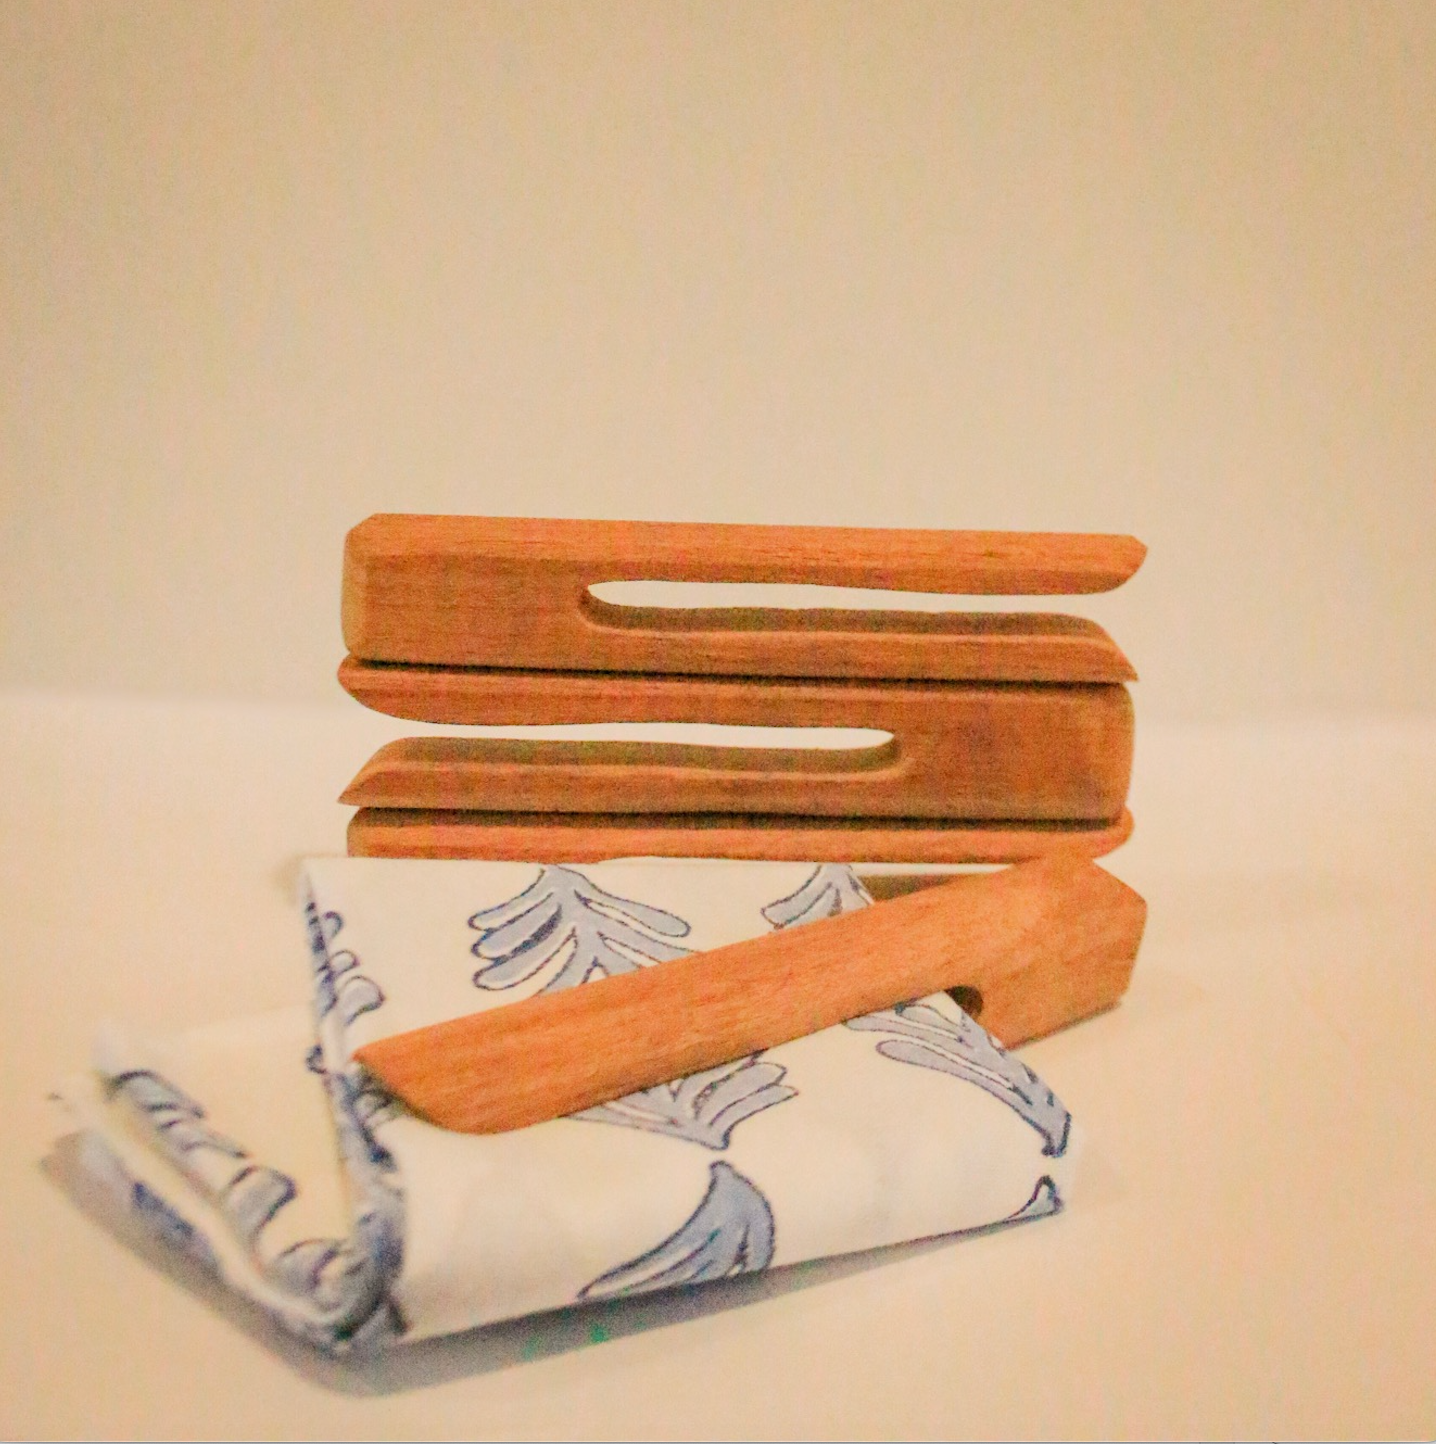 Hand-Carved Wooden Napkin Holders (Set of 4) - Clothespin by Mended